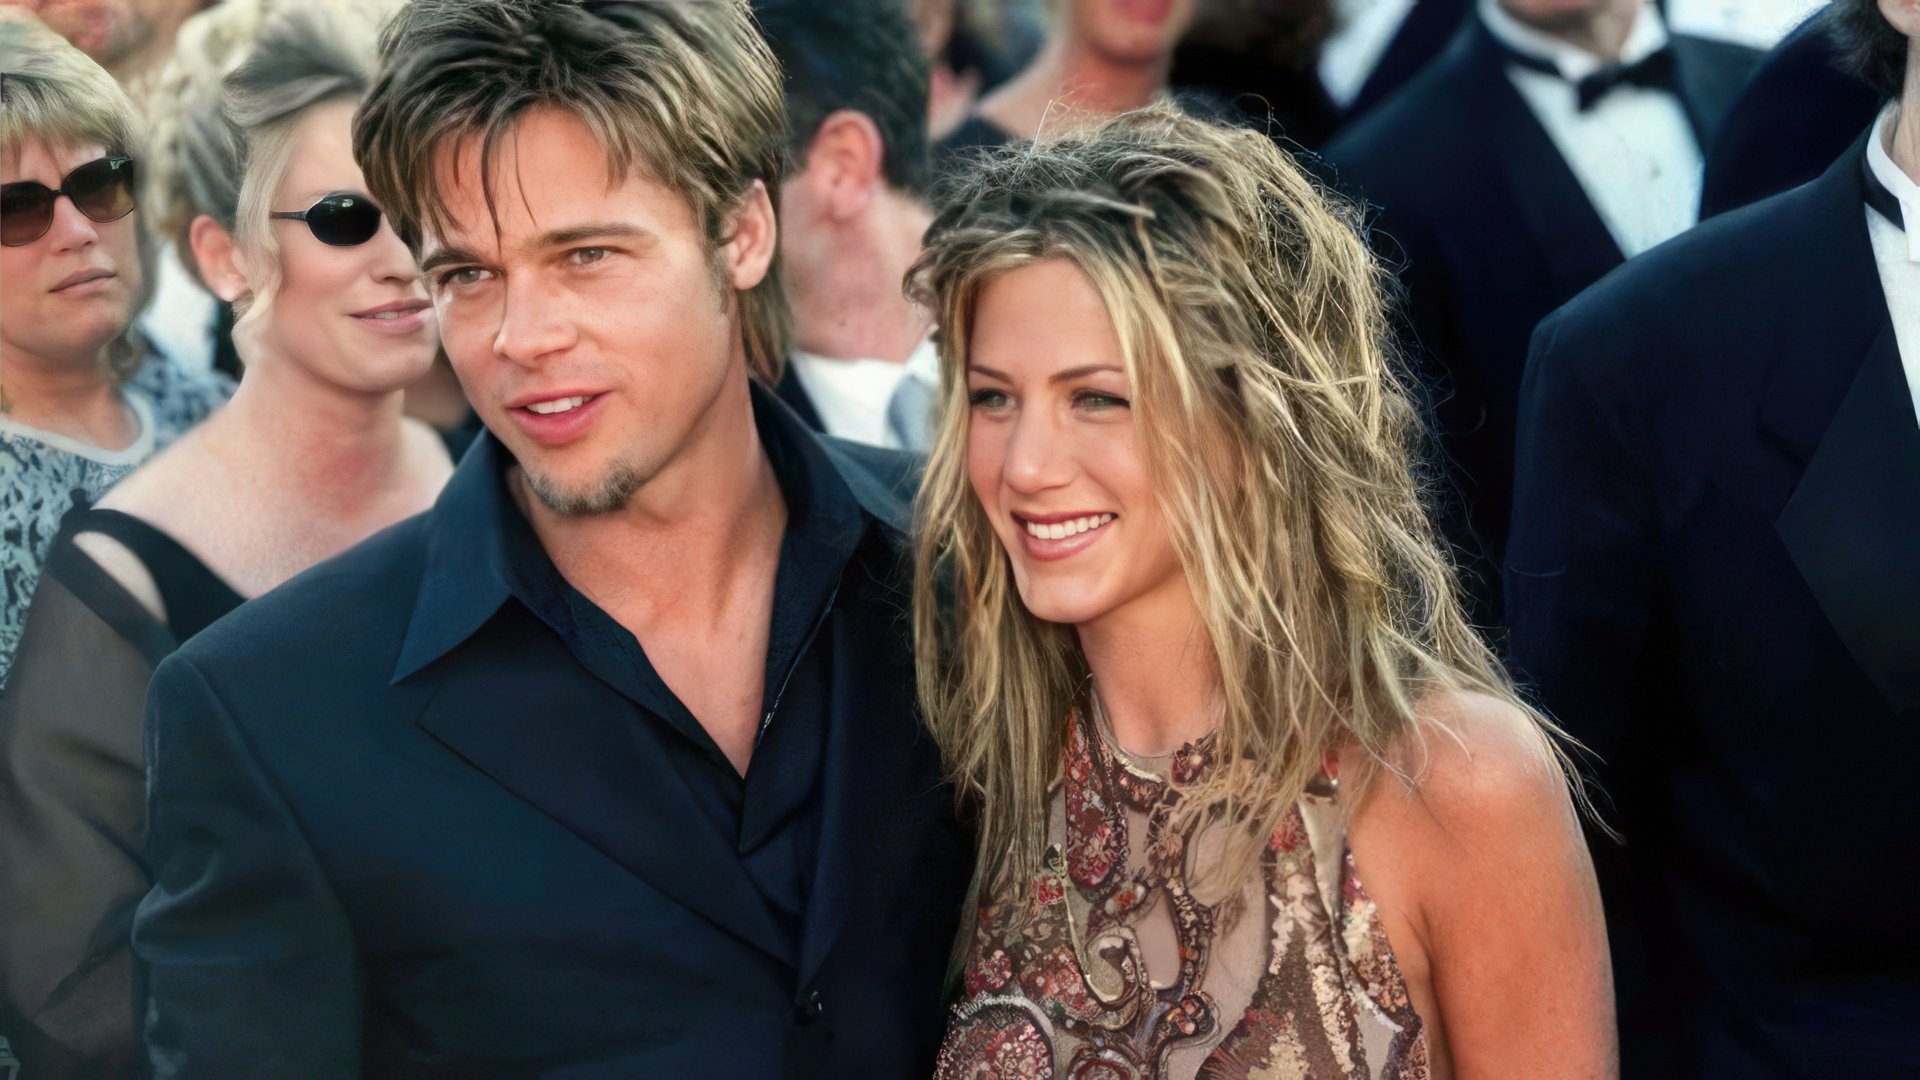 Brad Pitt and Jennifer Aniston were married for five years